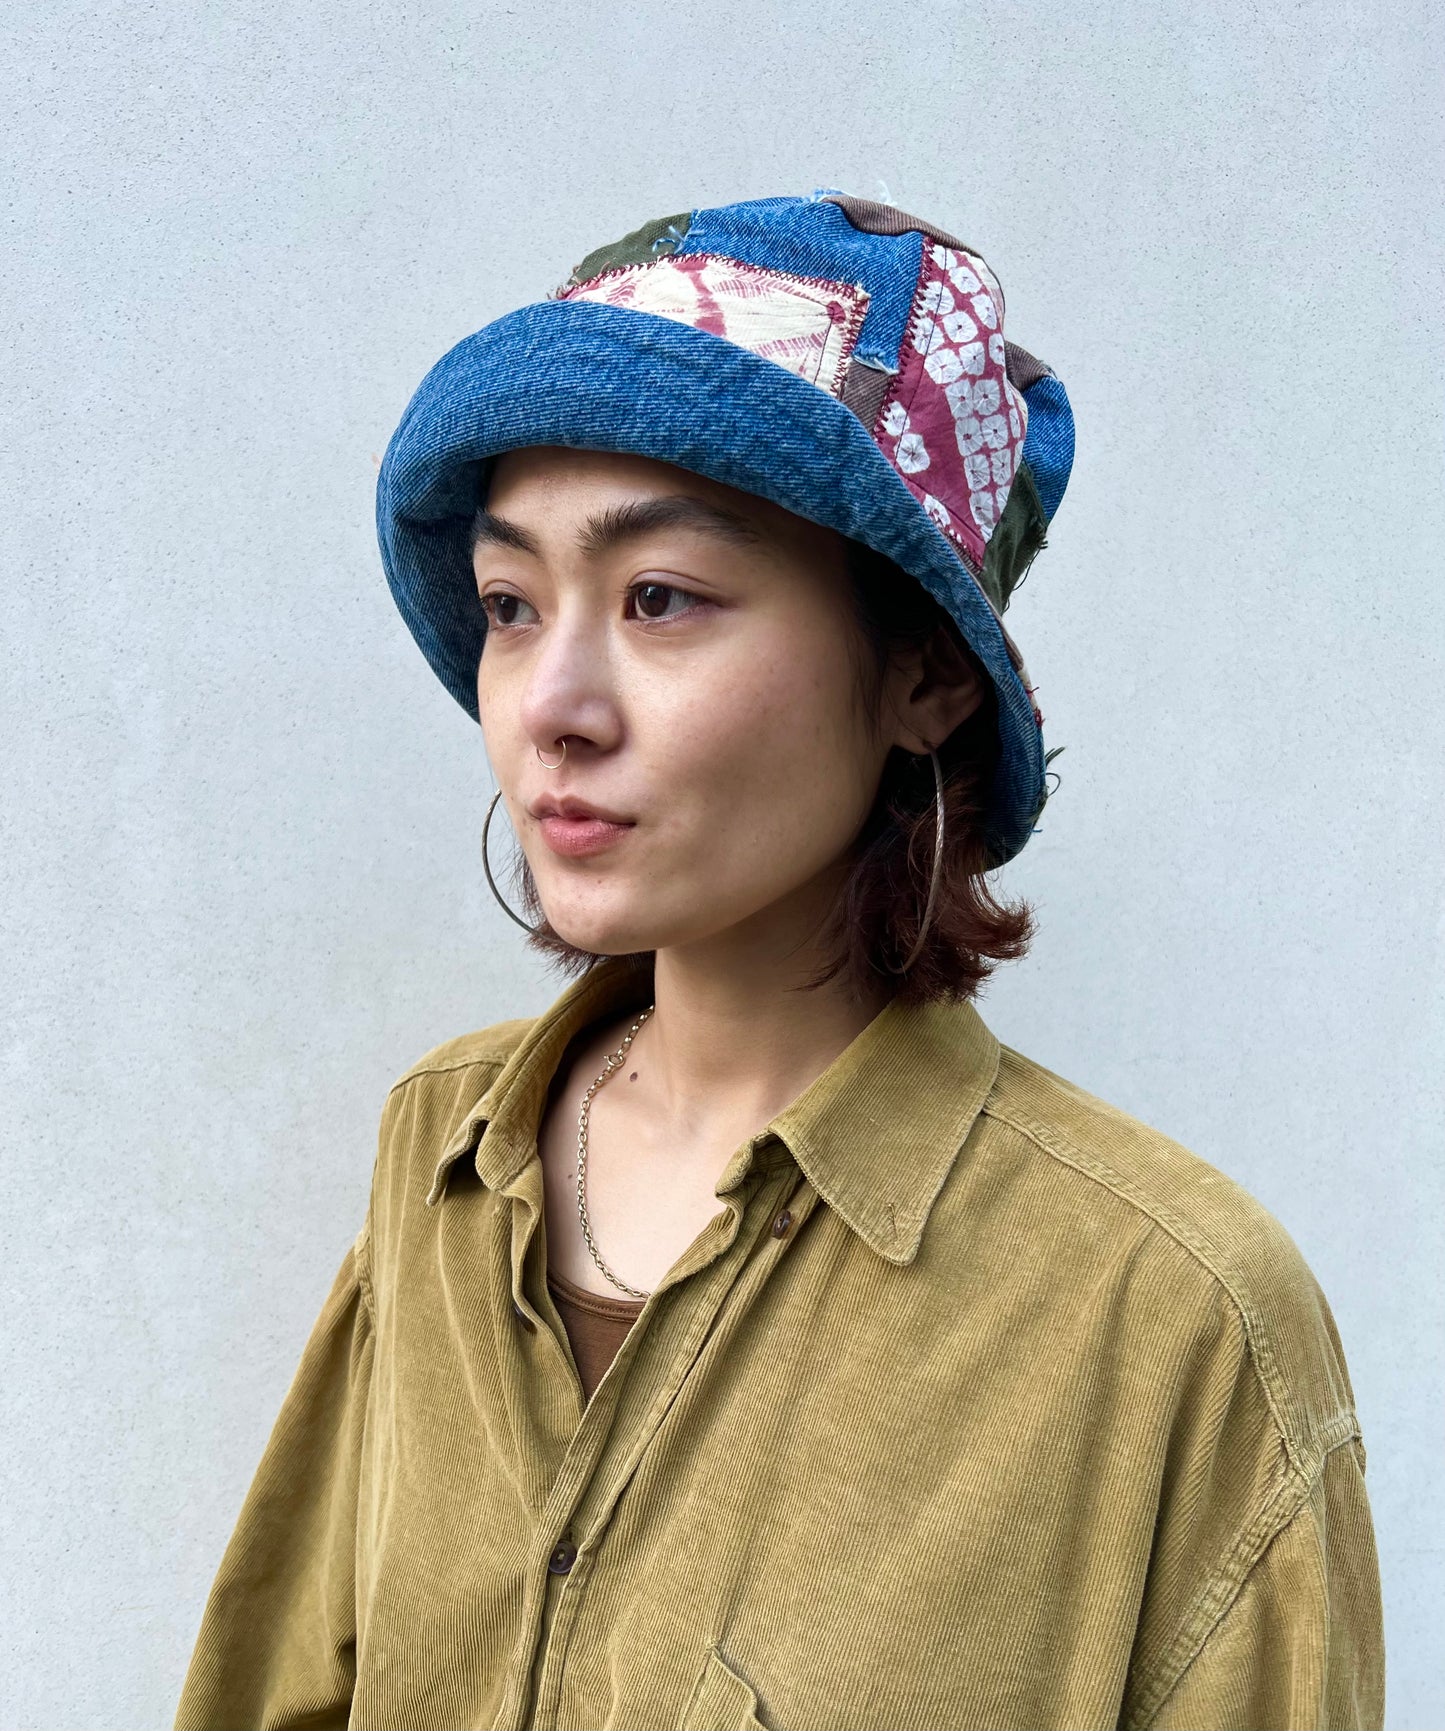 Patched Extra Big Bucket Hat Light Blue/Grey/Green/Brown w Japanese Kimono